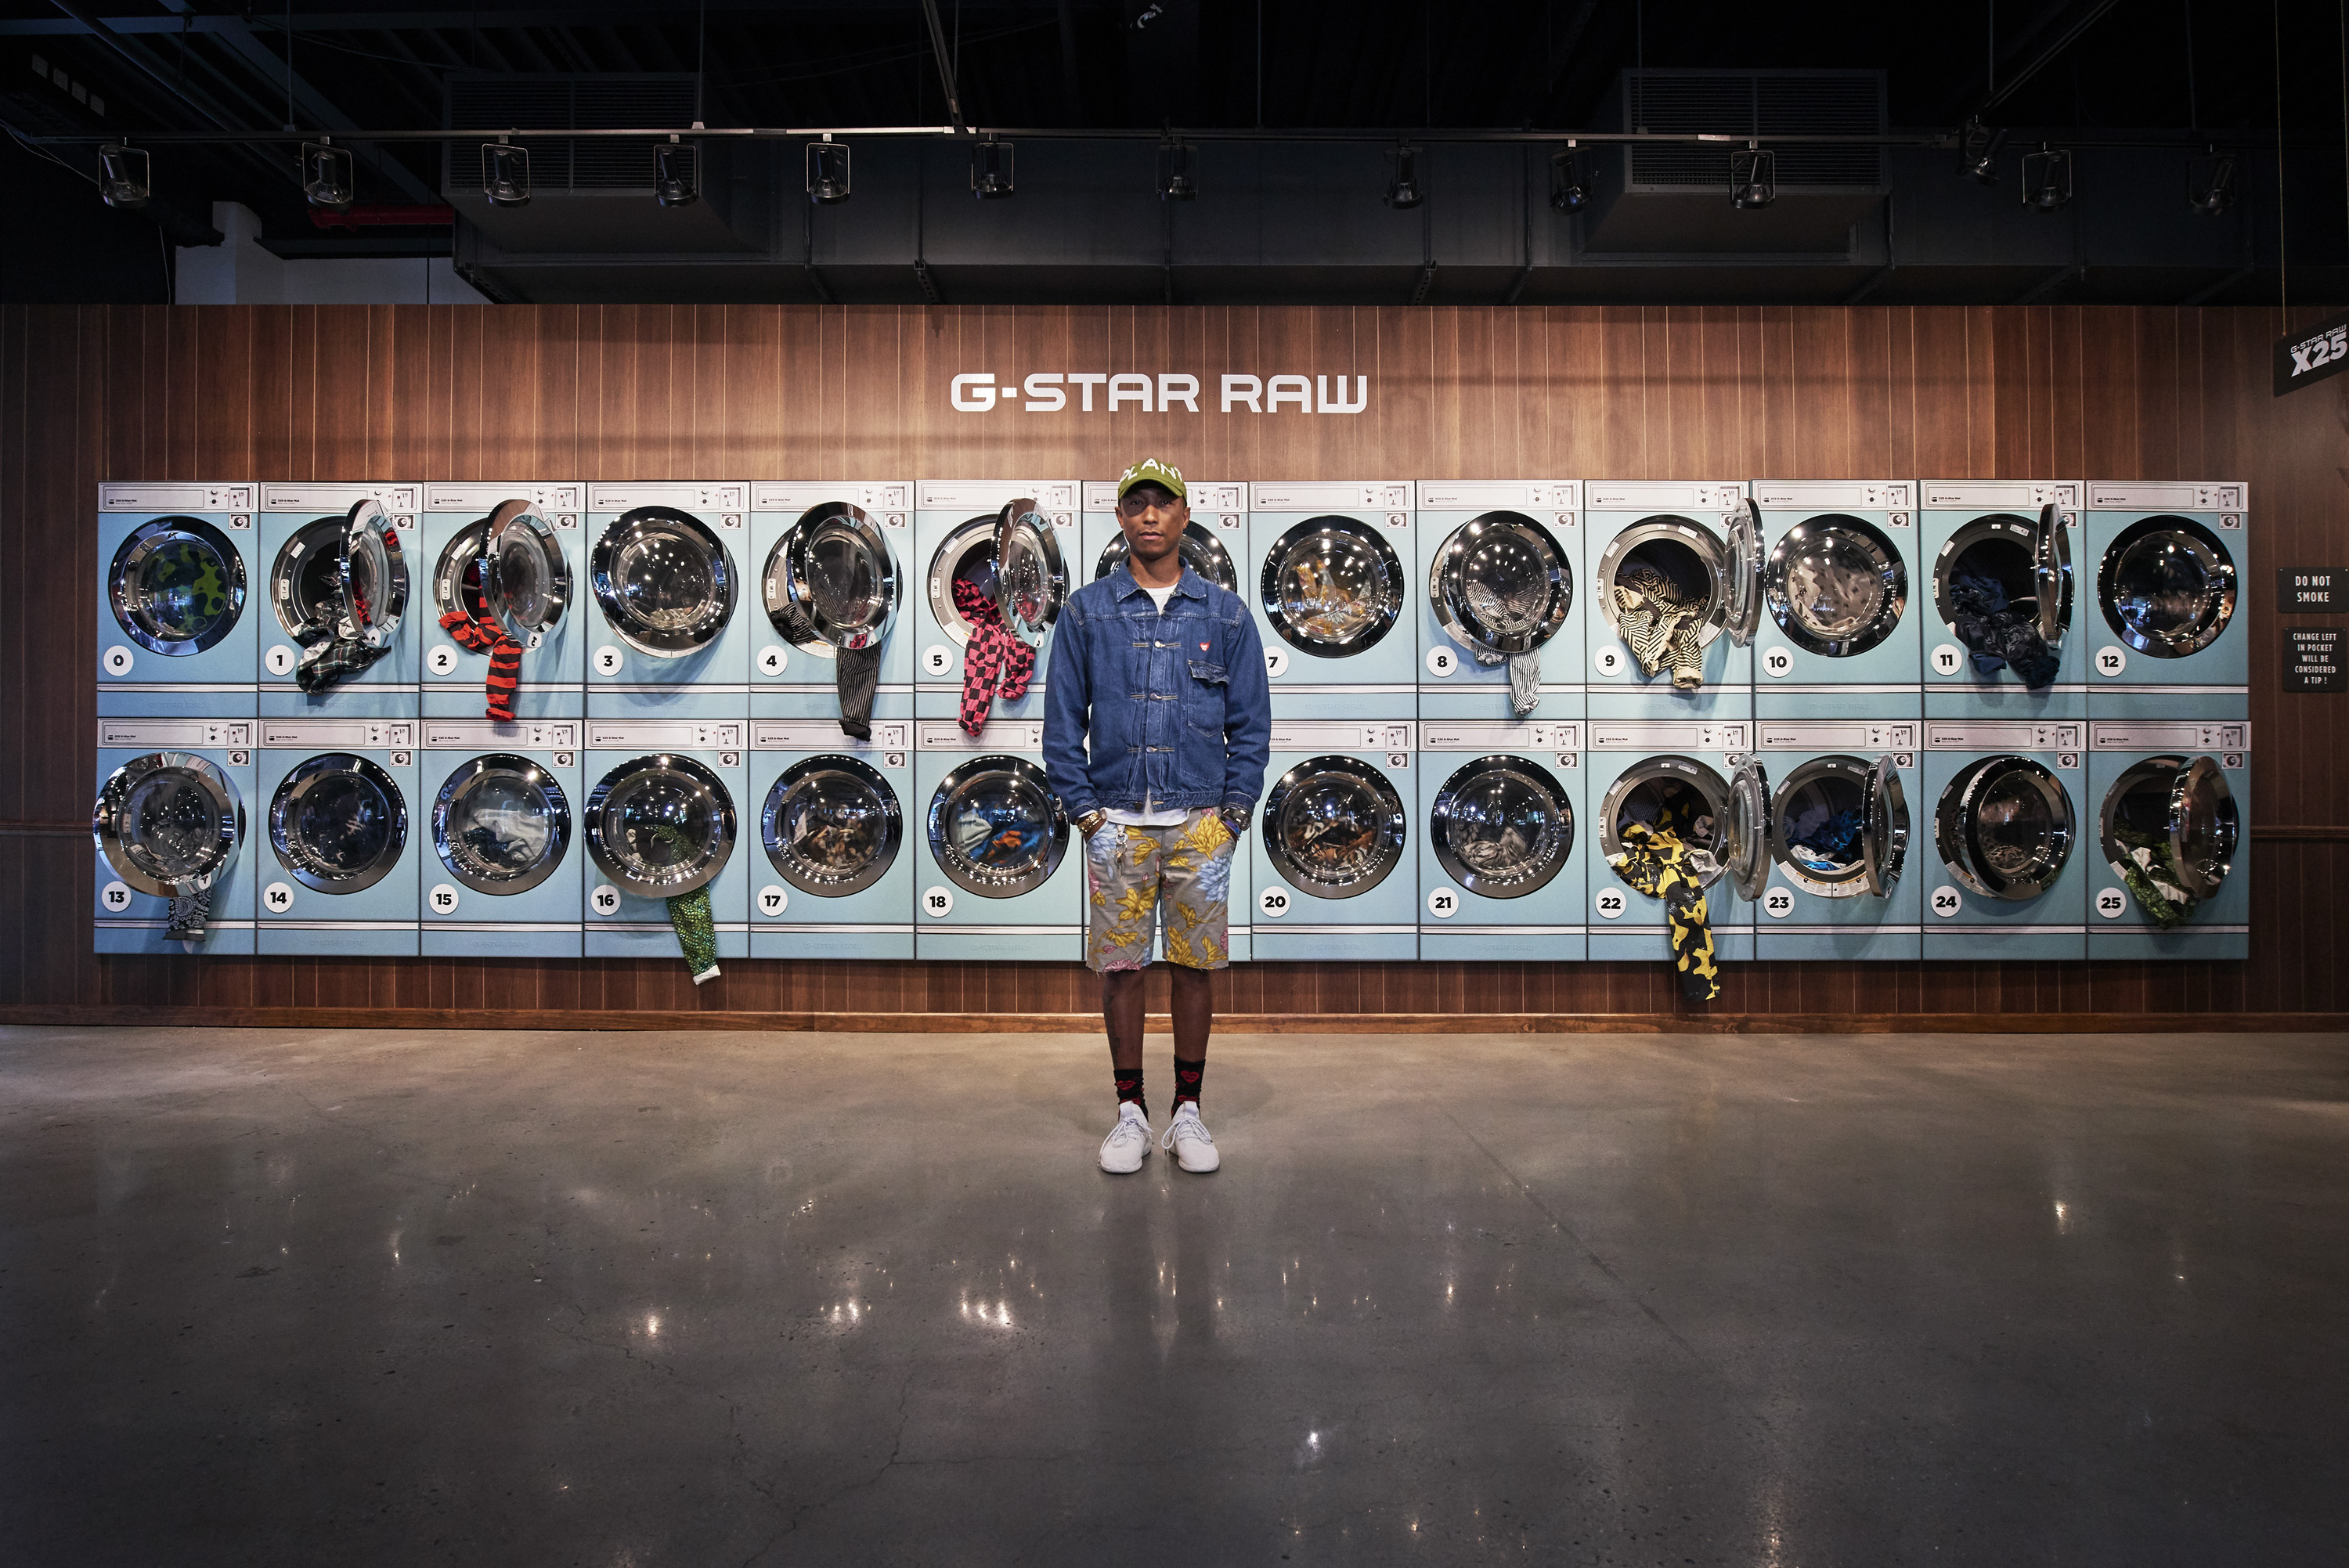 PHARRELL WILLIAMS PRESENTED IN N.Y HIS NEW CREATIONS FOR G-STAR RAW